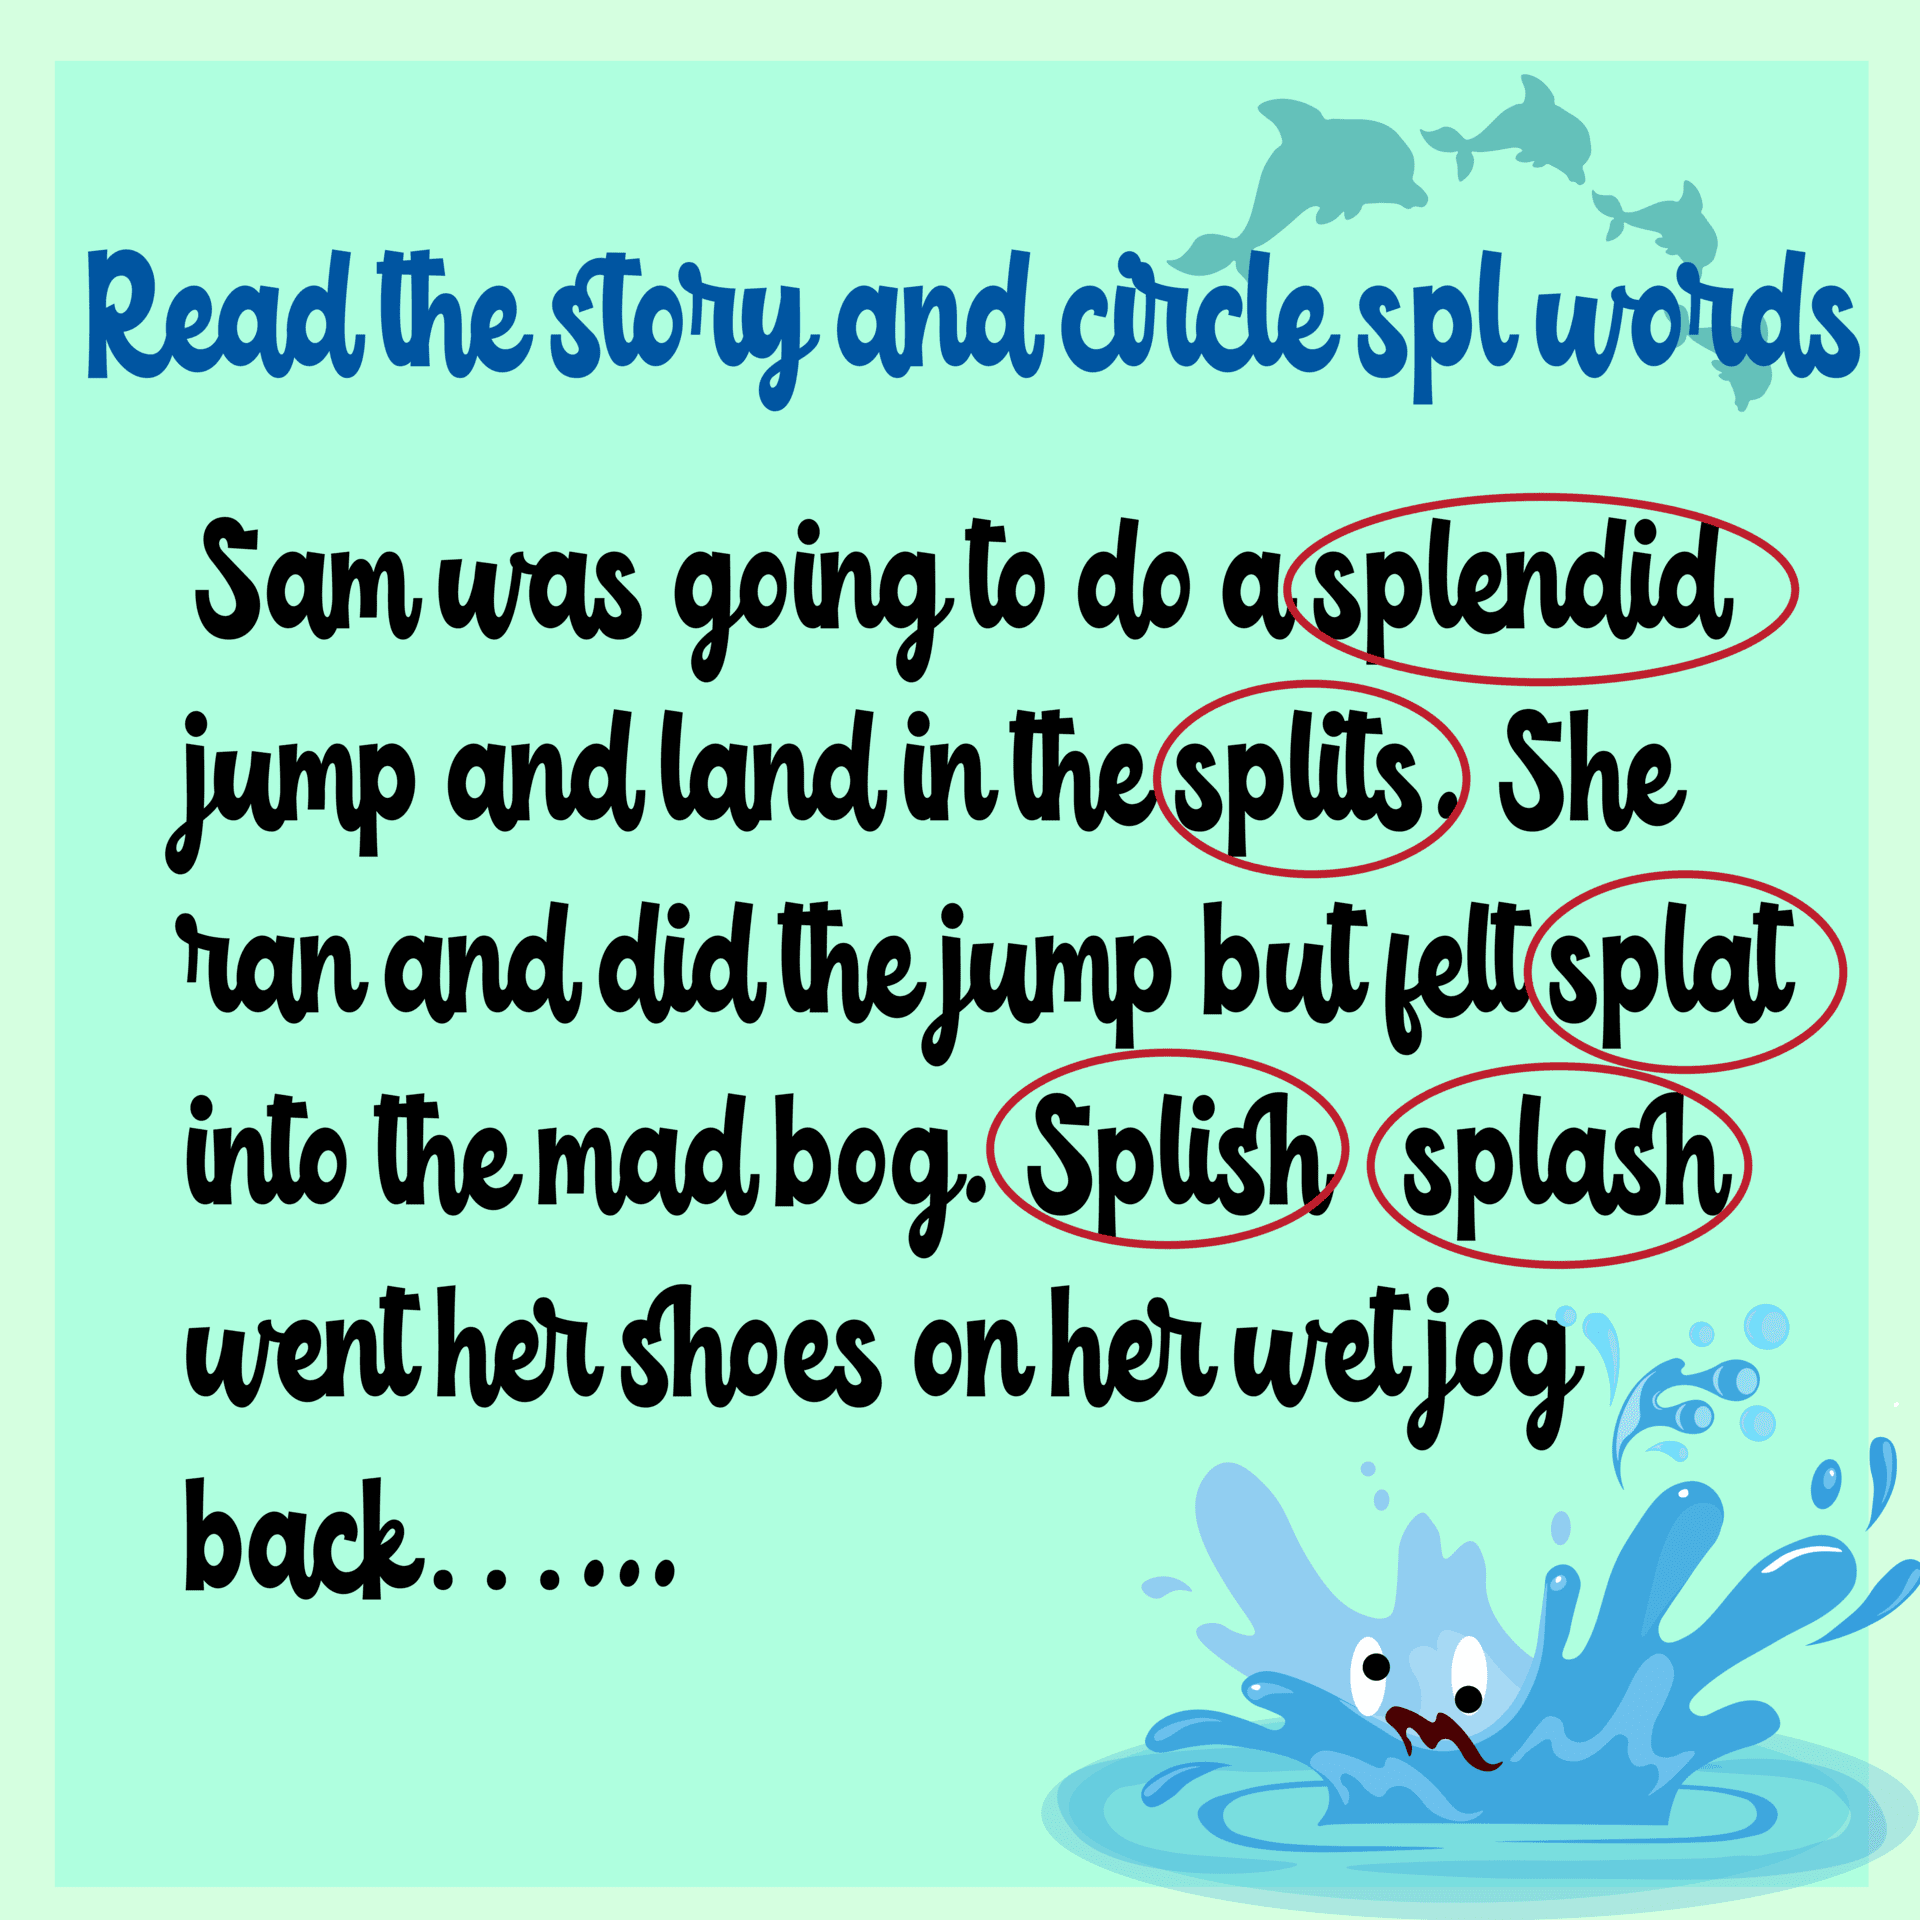 Story Time!